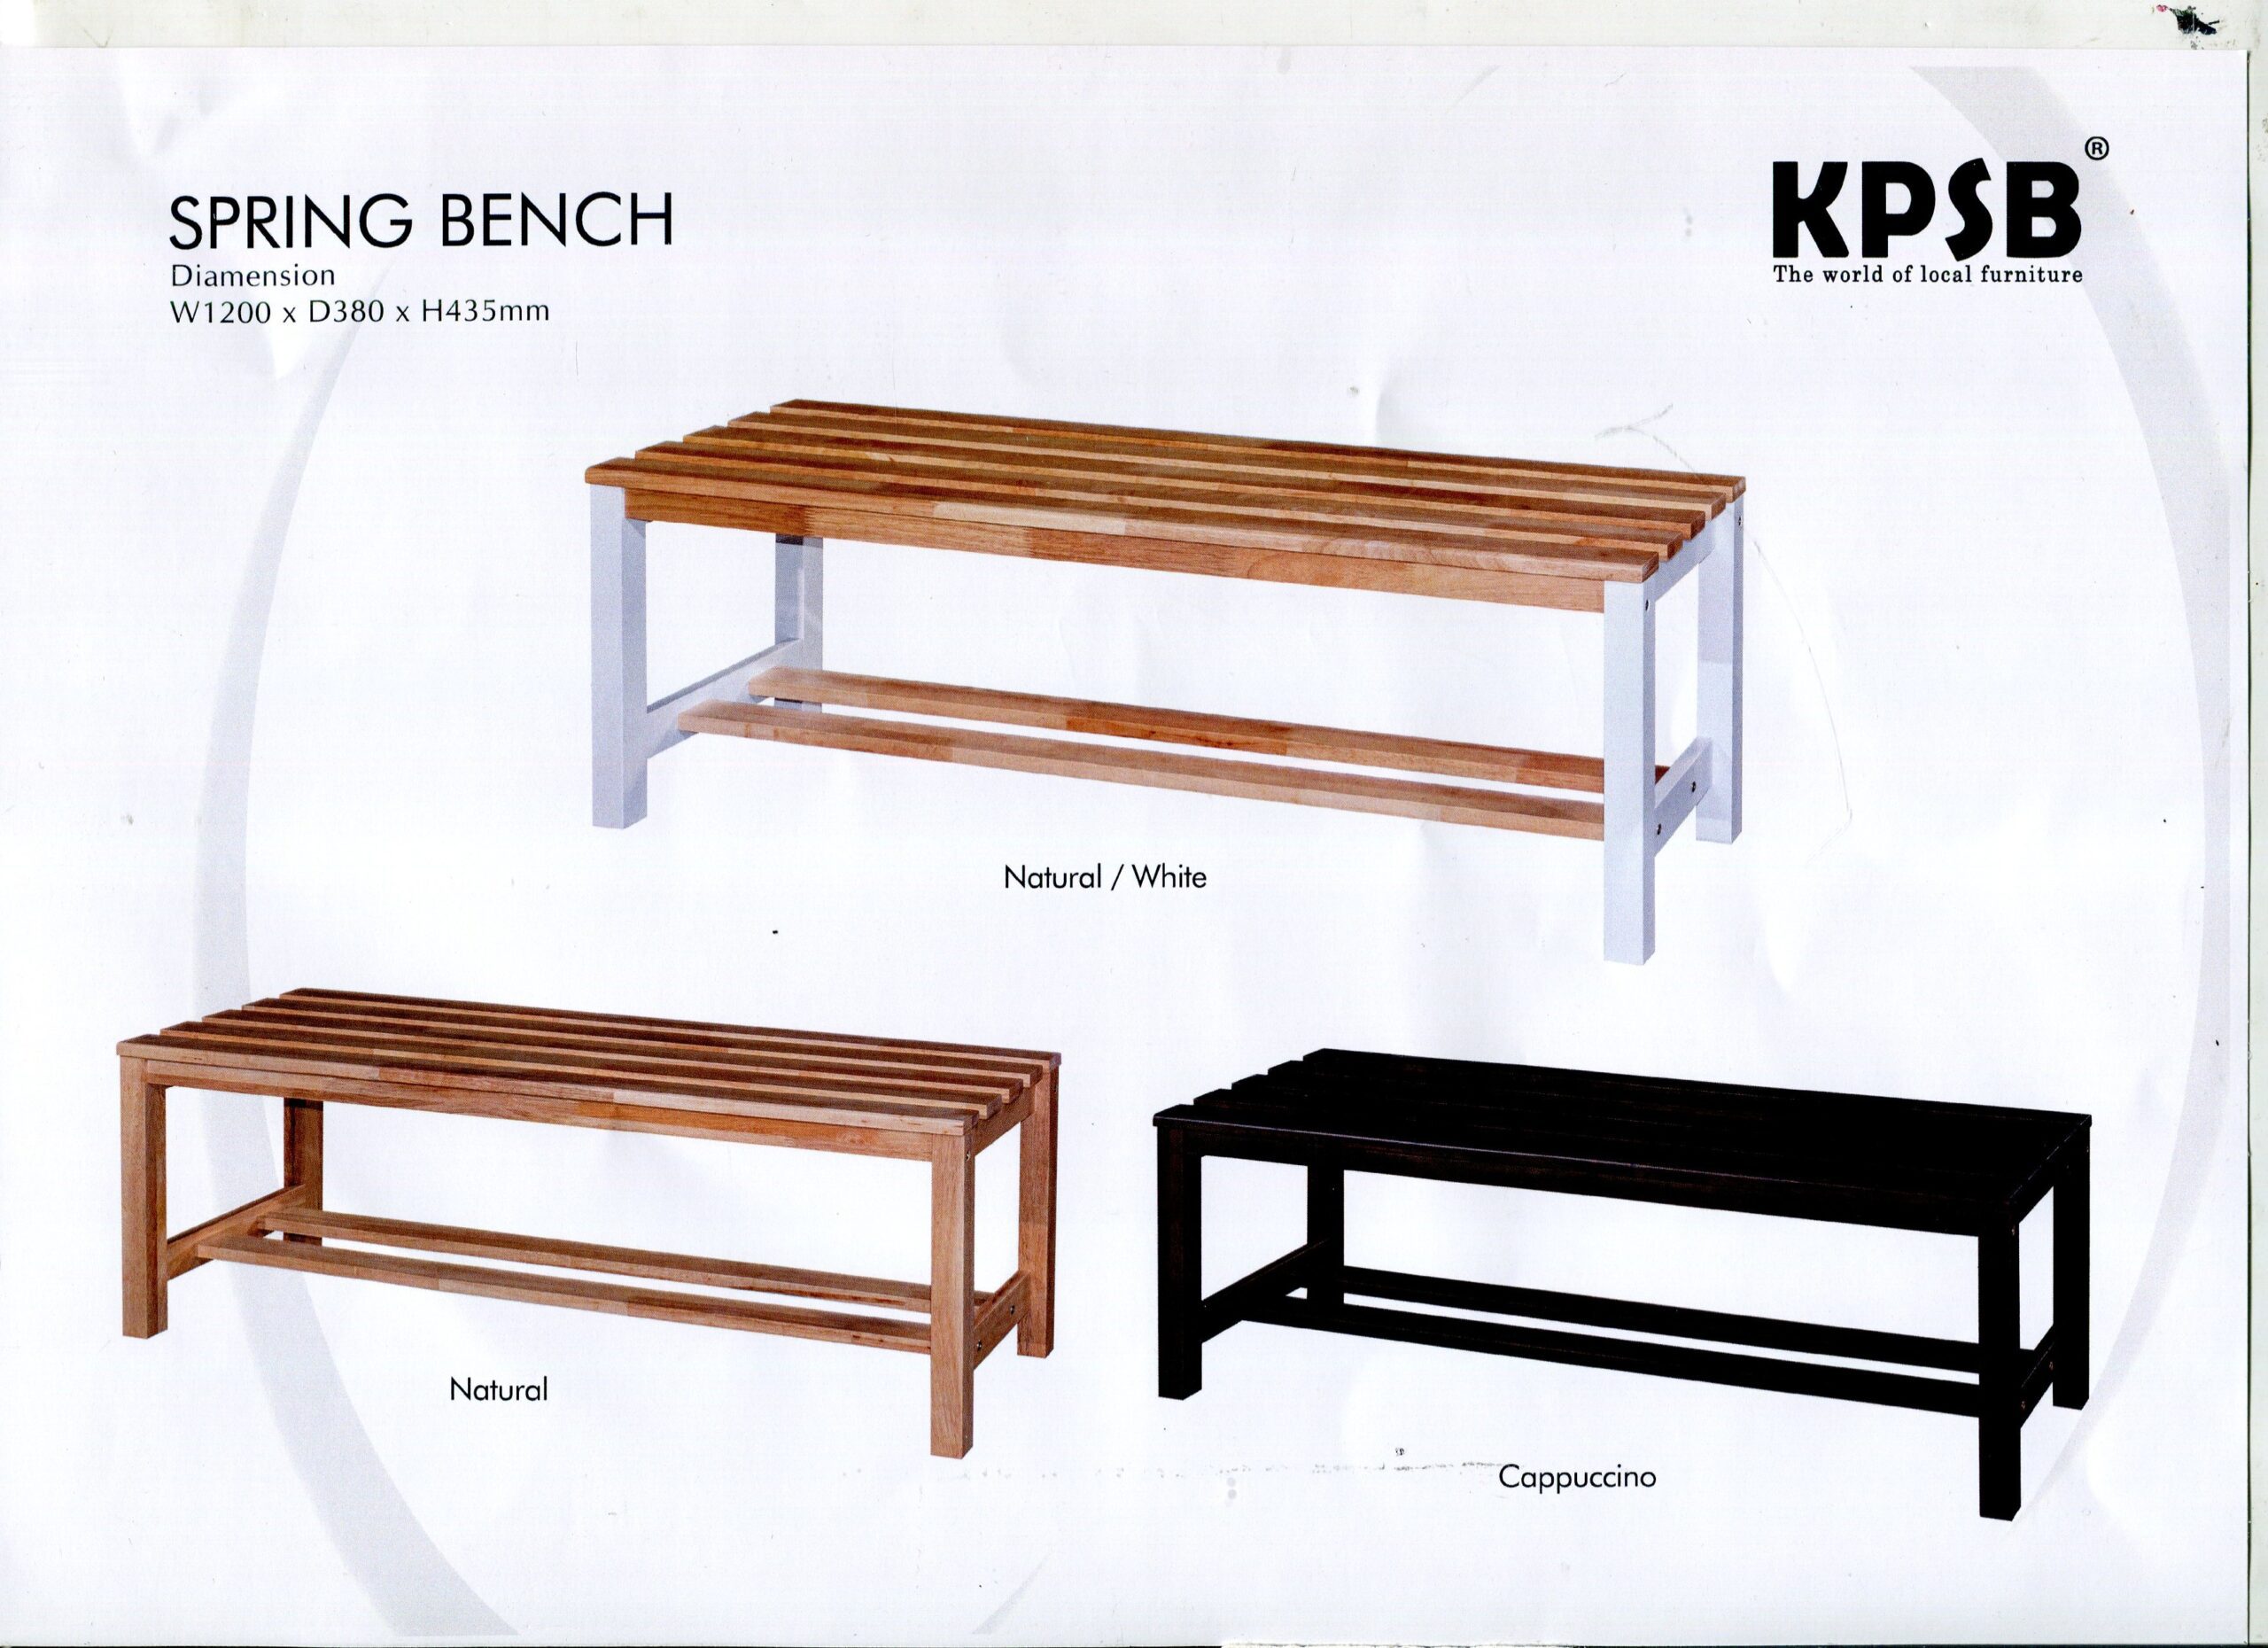 Product: SPRING BENCH